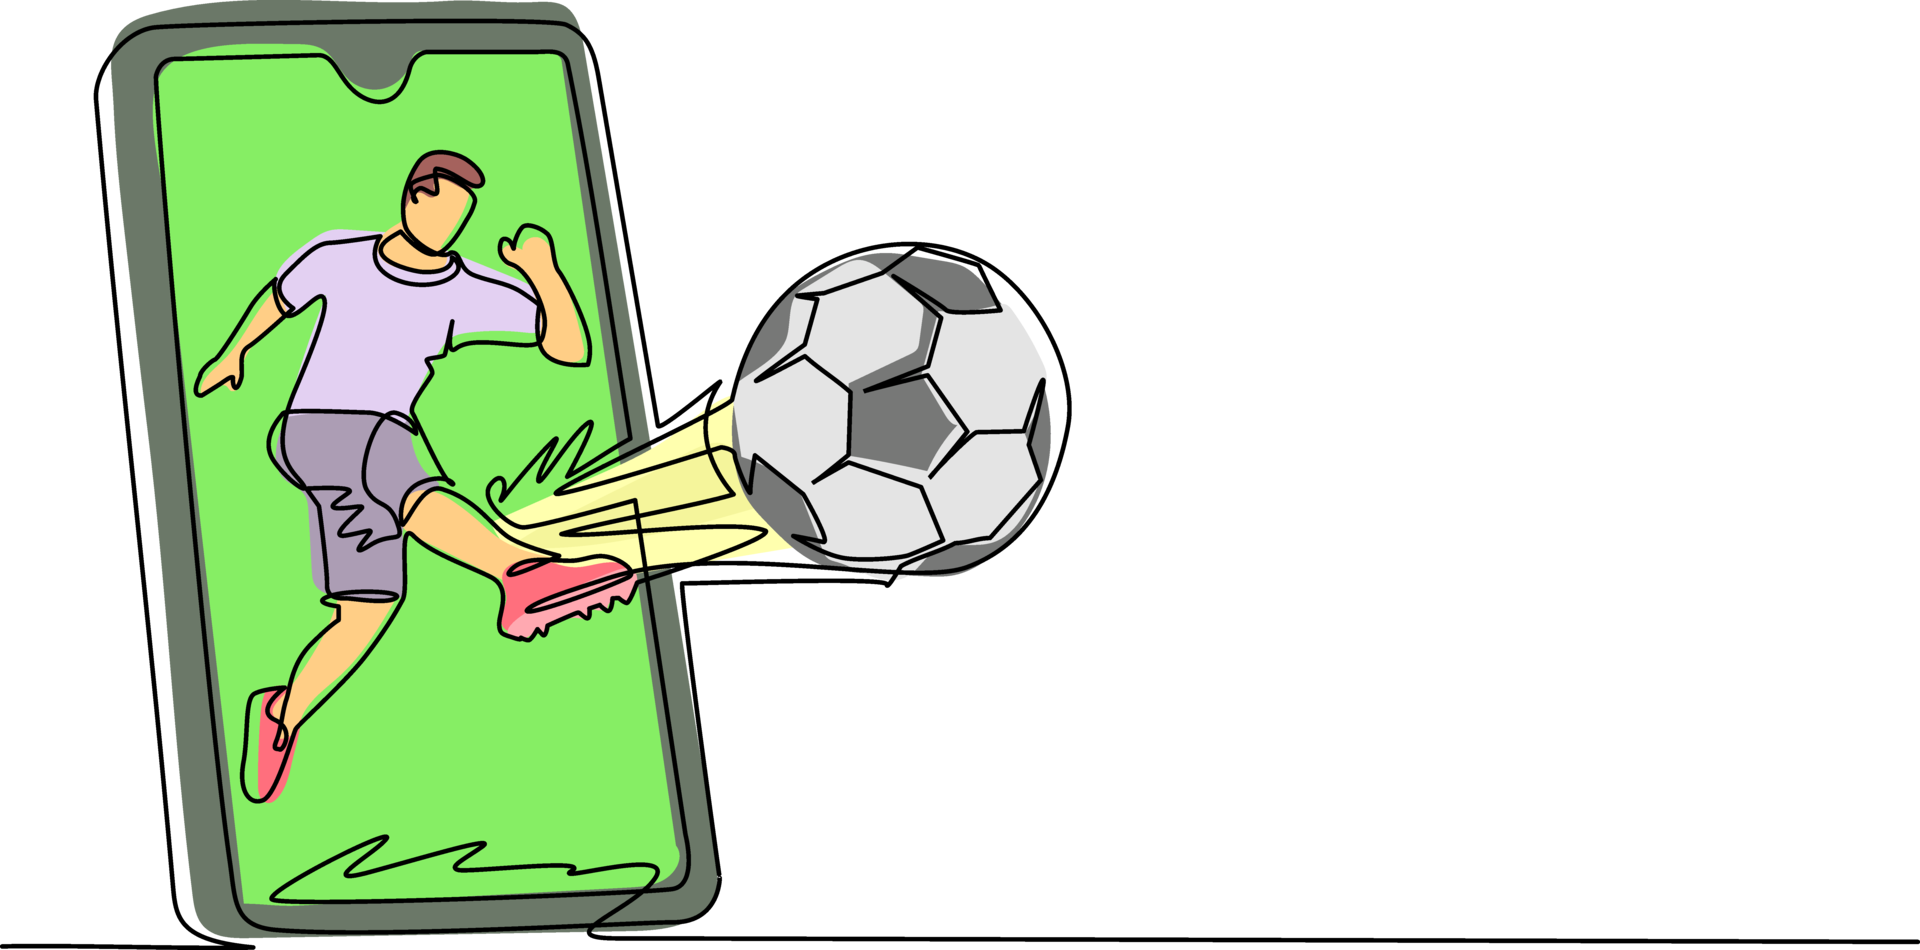 Single continuous line drawing soccer player shooting ball and getting out of smartphone screen. Mobile sports play match